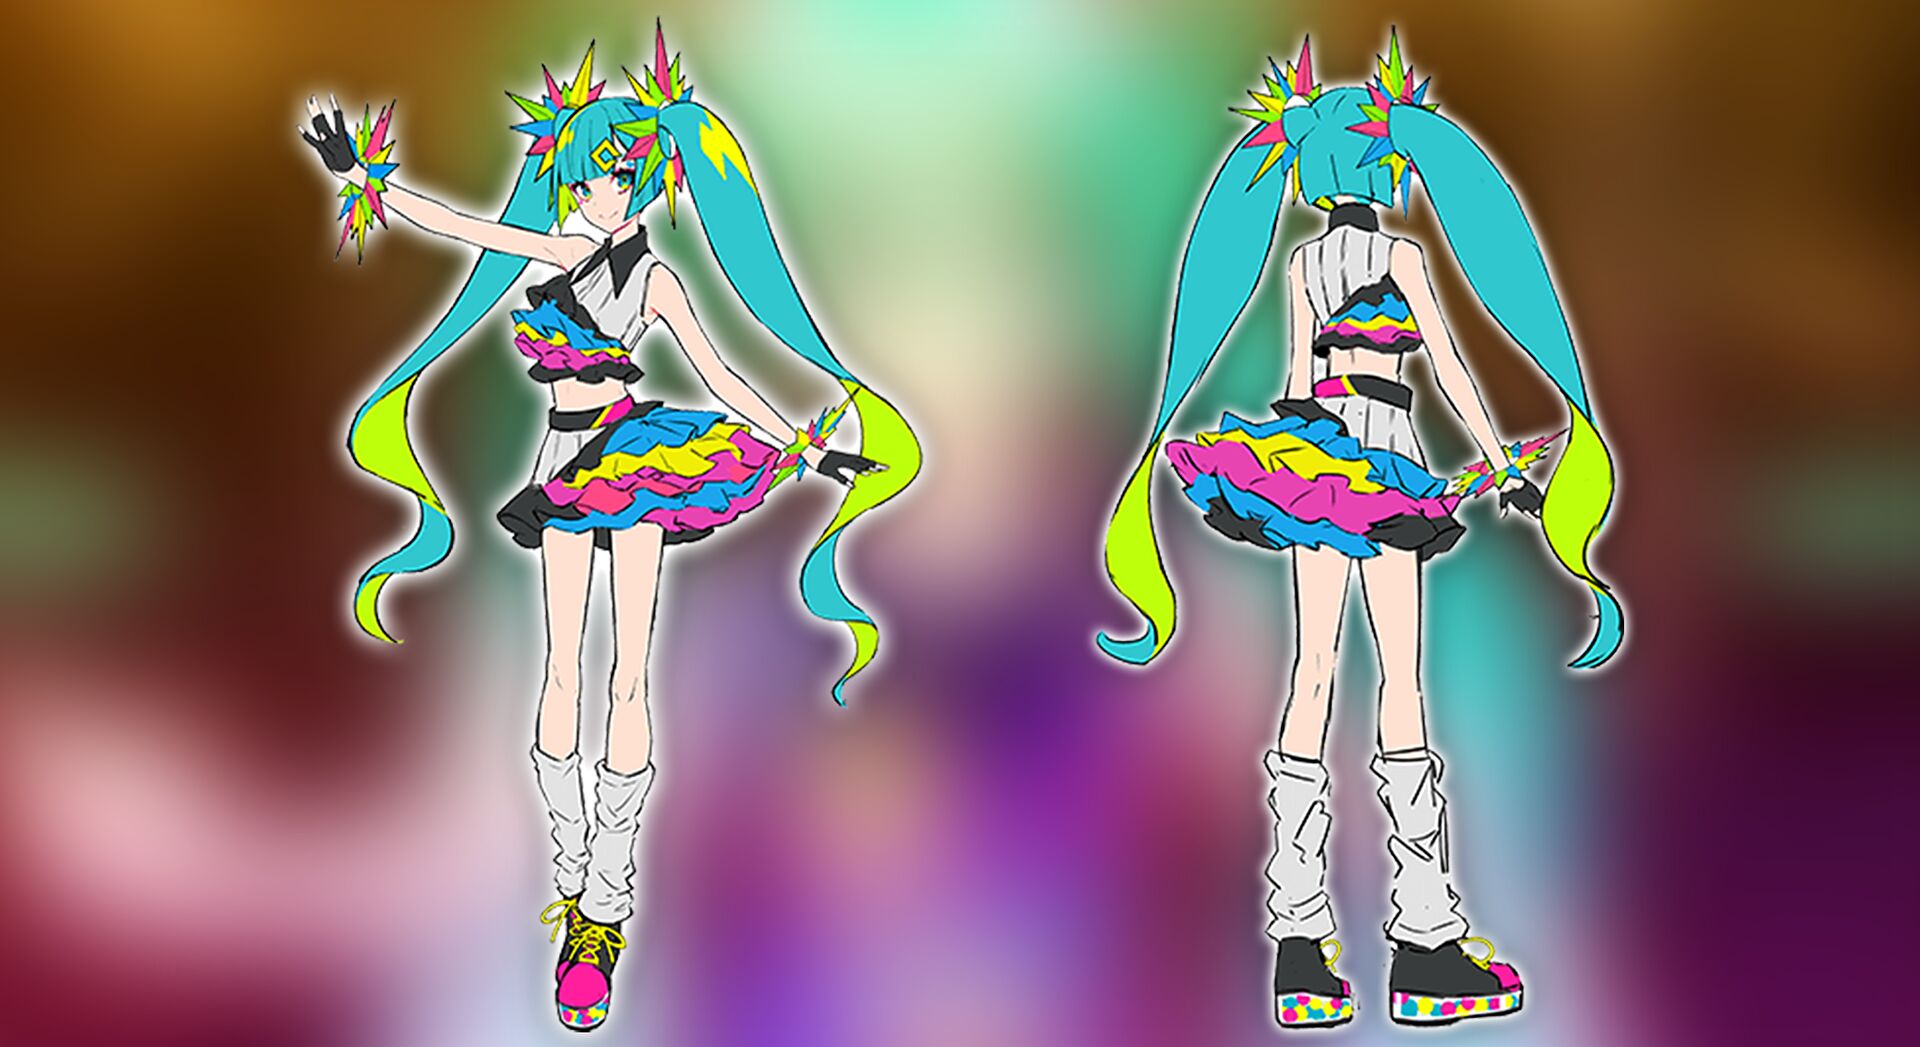 The new Hatsune Miku: Project DIVA Mega Mix DLC comes with 72 new songs